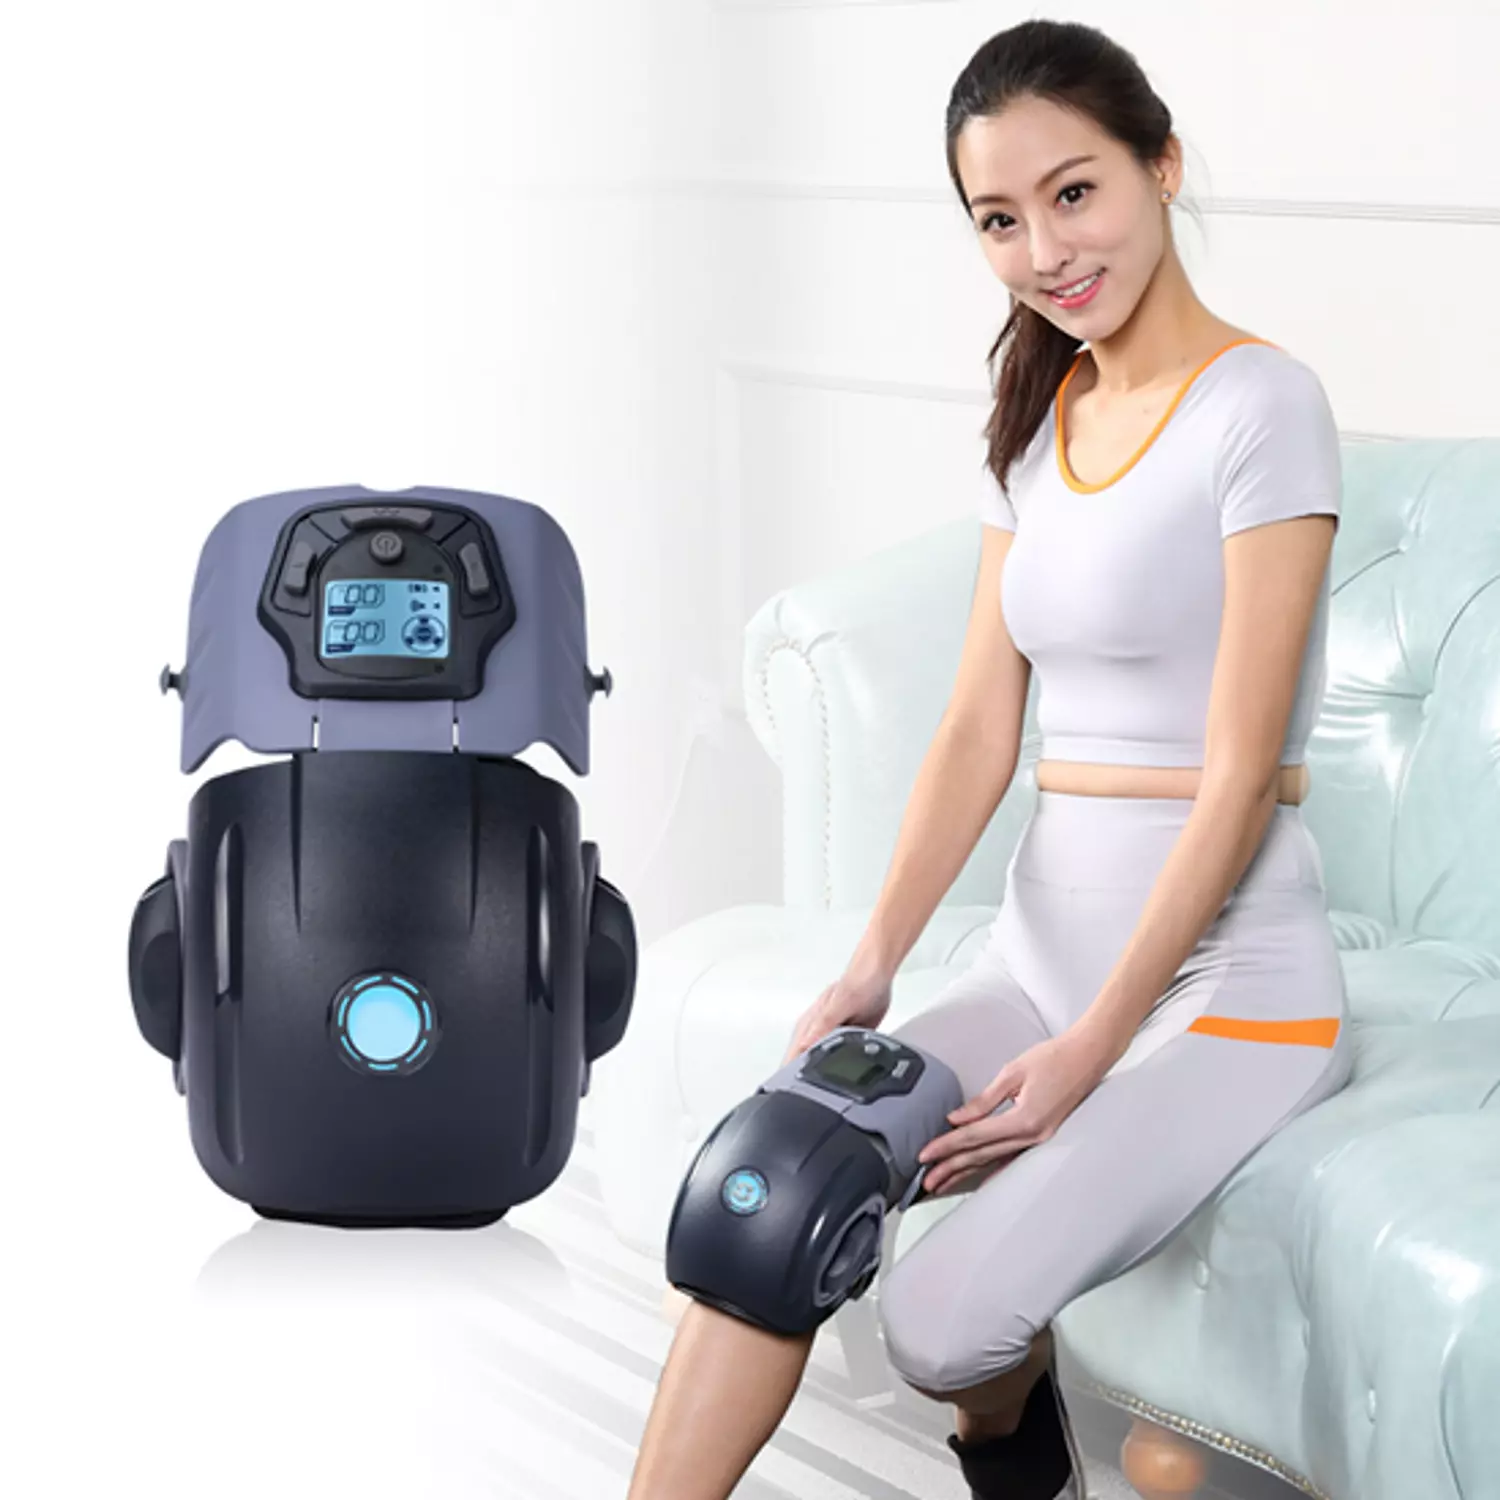 Thermal Frequency Joint and Knee Rehabilitation Device for Pain Relief hover image